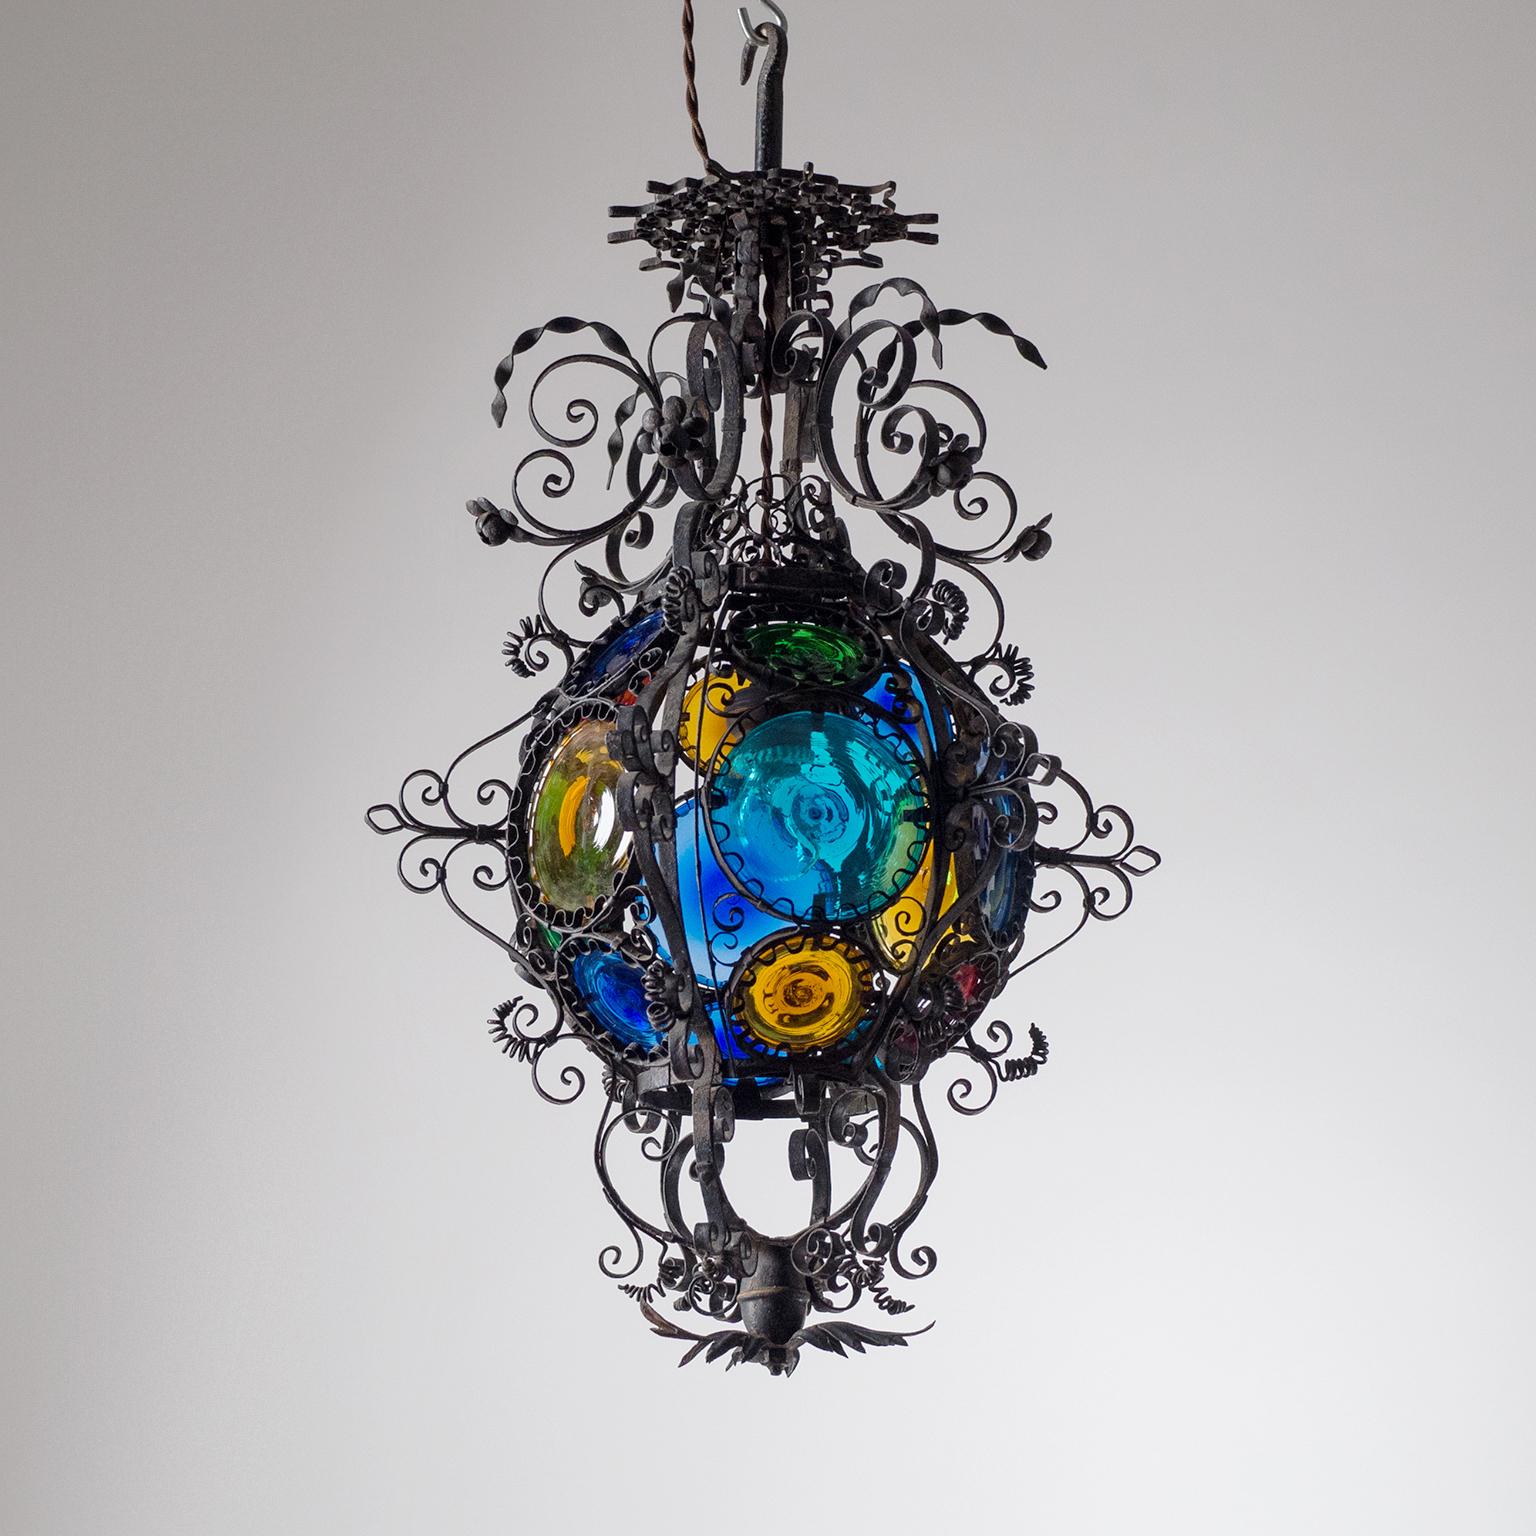 Lavishly decorated Italian wrought iron lantern with stained glass, late 19th century. A corpus (10inch/25cm diameter) of stained glass is surrounded by wrought iron curls, twists, floral and geometric ornaments. Nice original condition with patina